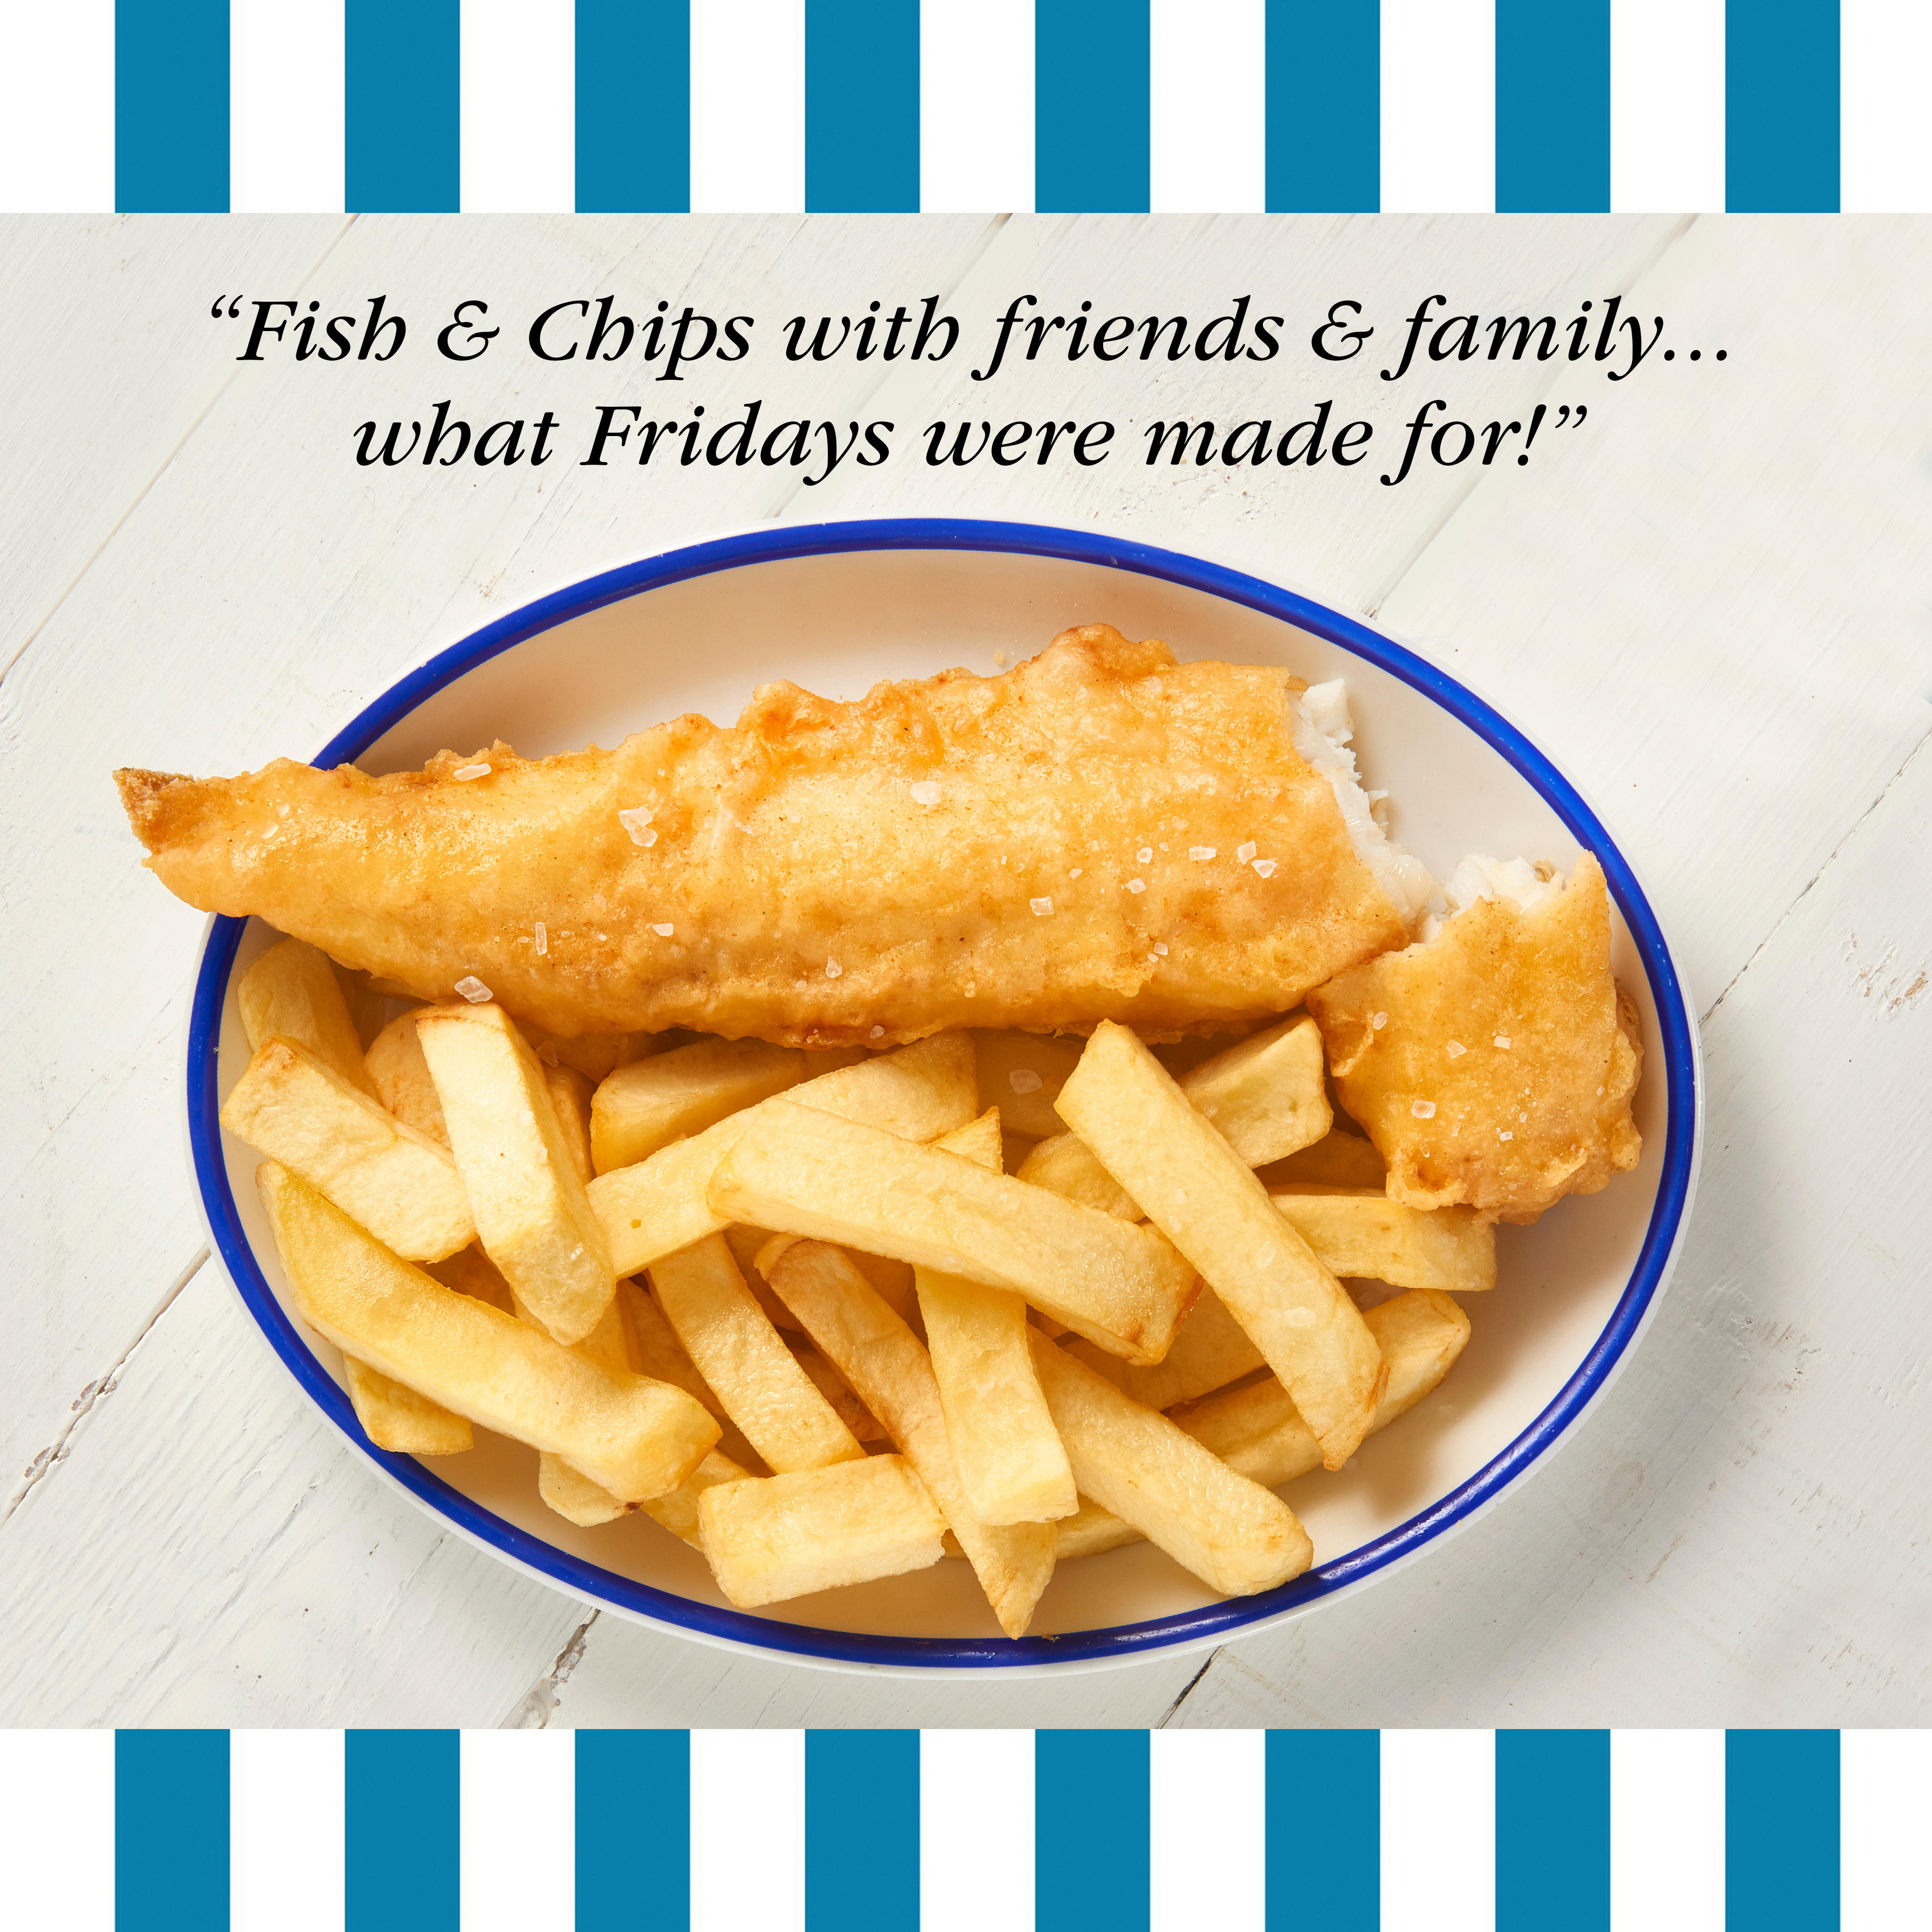 Images Churchill's Fish & Chips Stansted